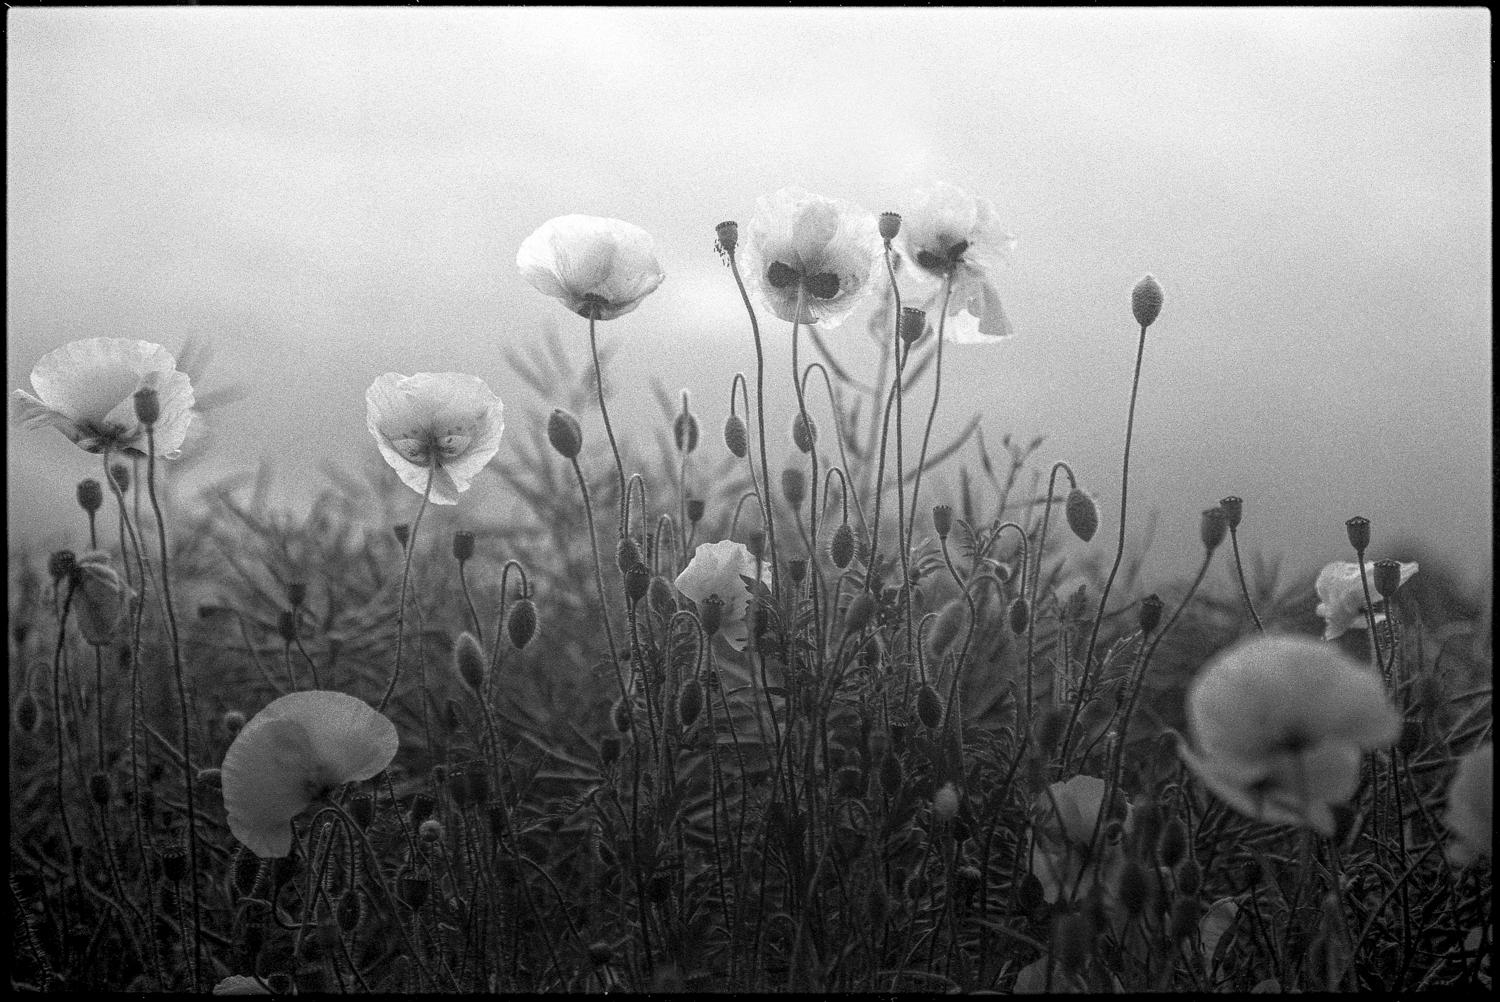 Paul Cooklin Black and White Photograph - Edition 2/10 - Poppy's, Suffolk, Silver Gelatin Photograph